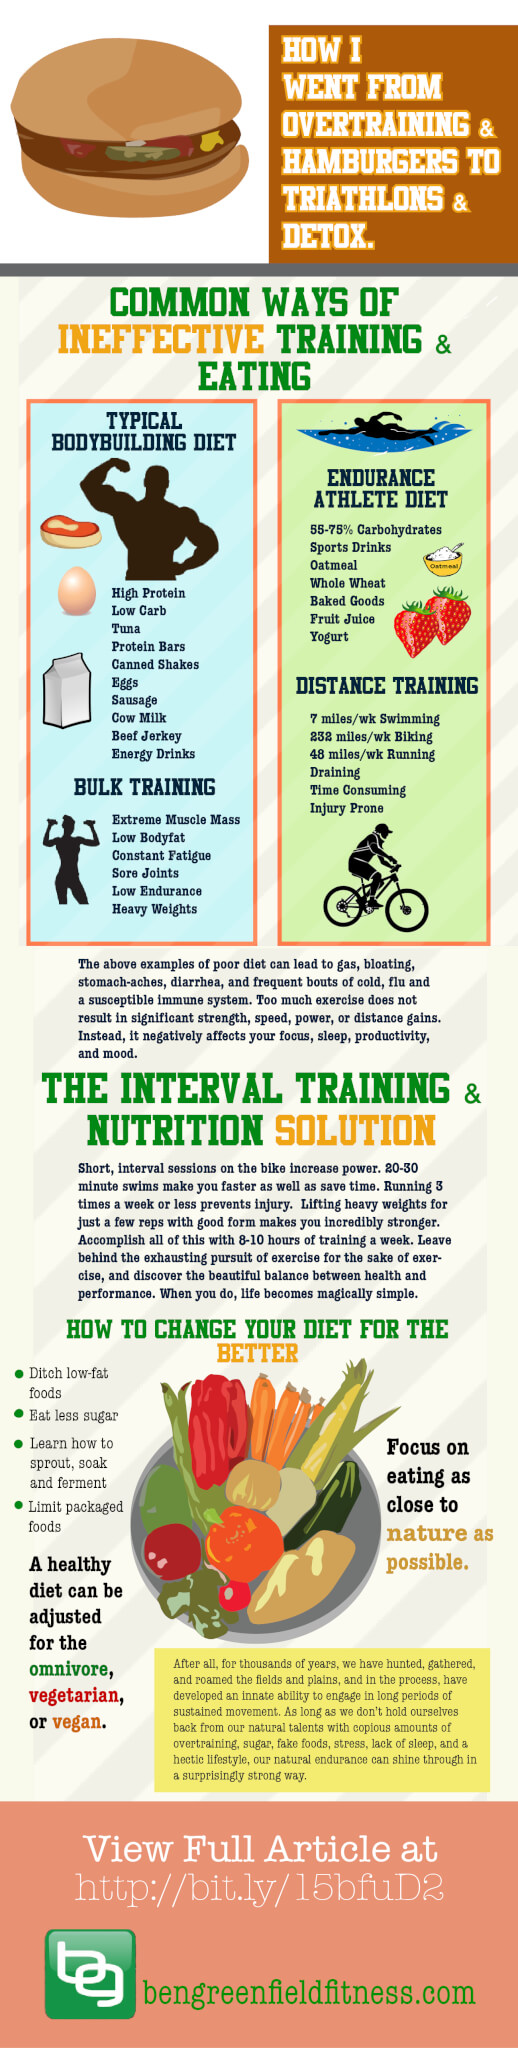 Common Ways of Ineffective Training and Eating